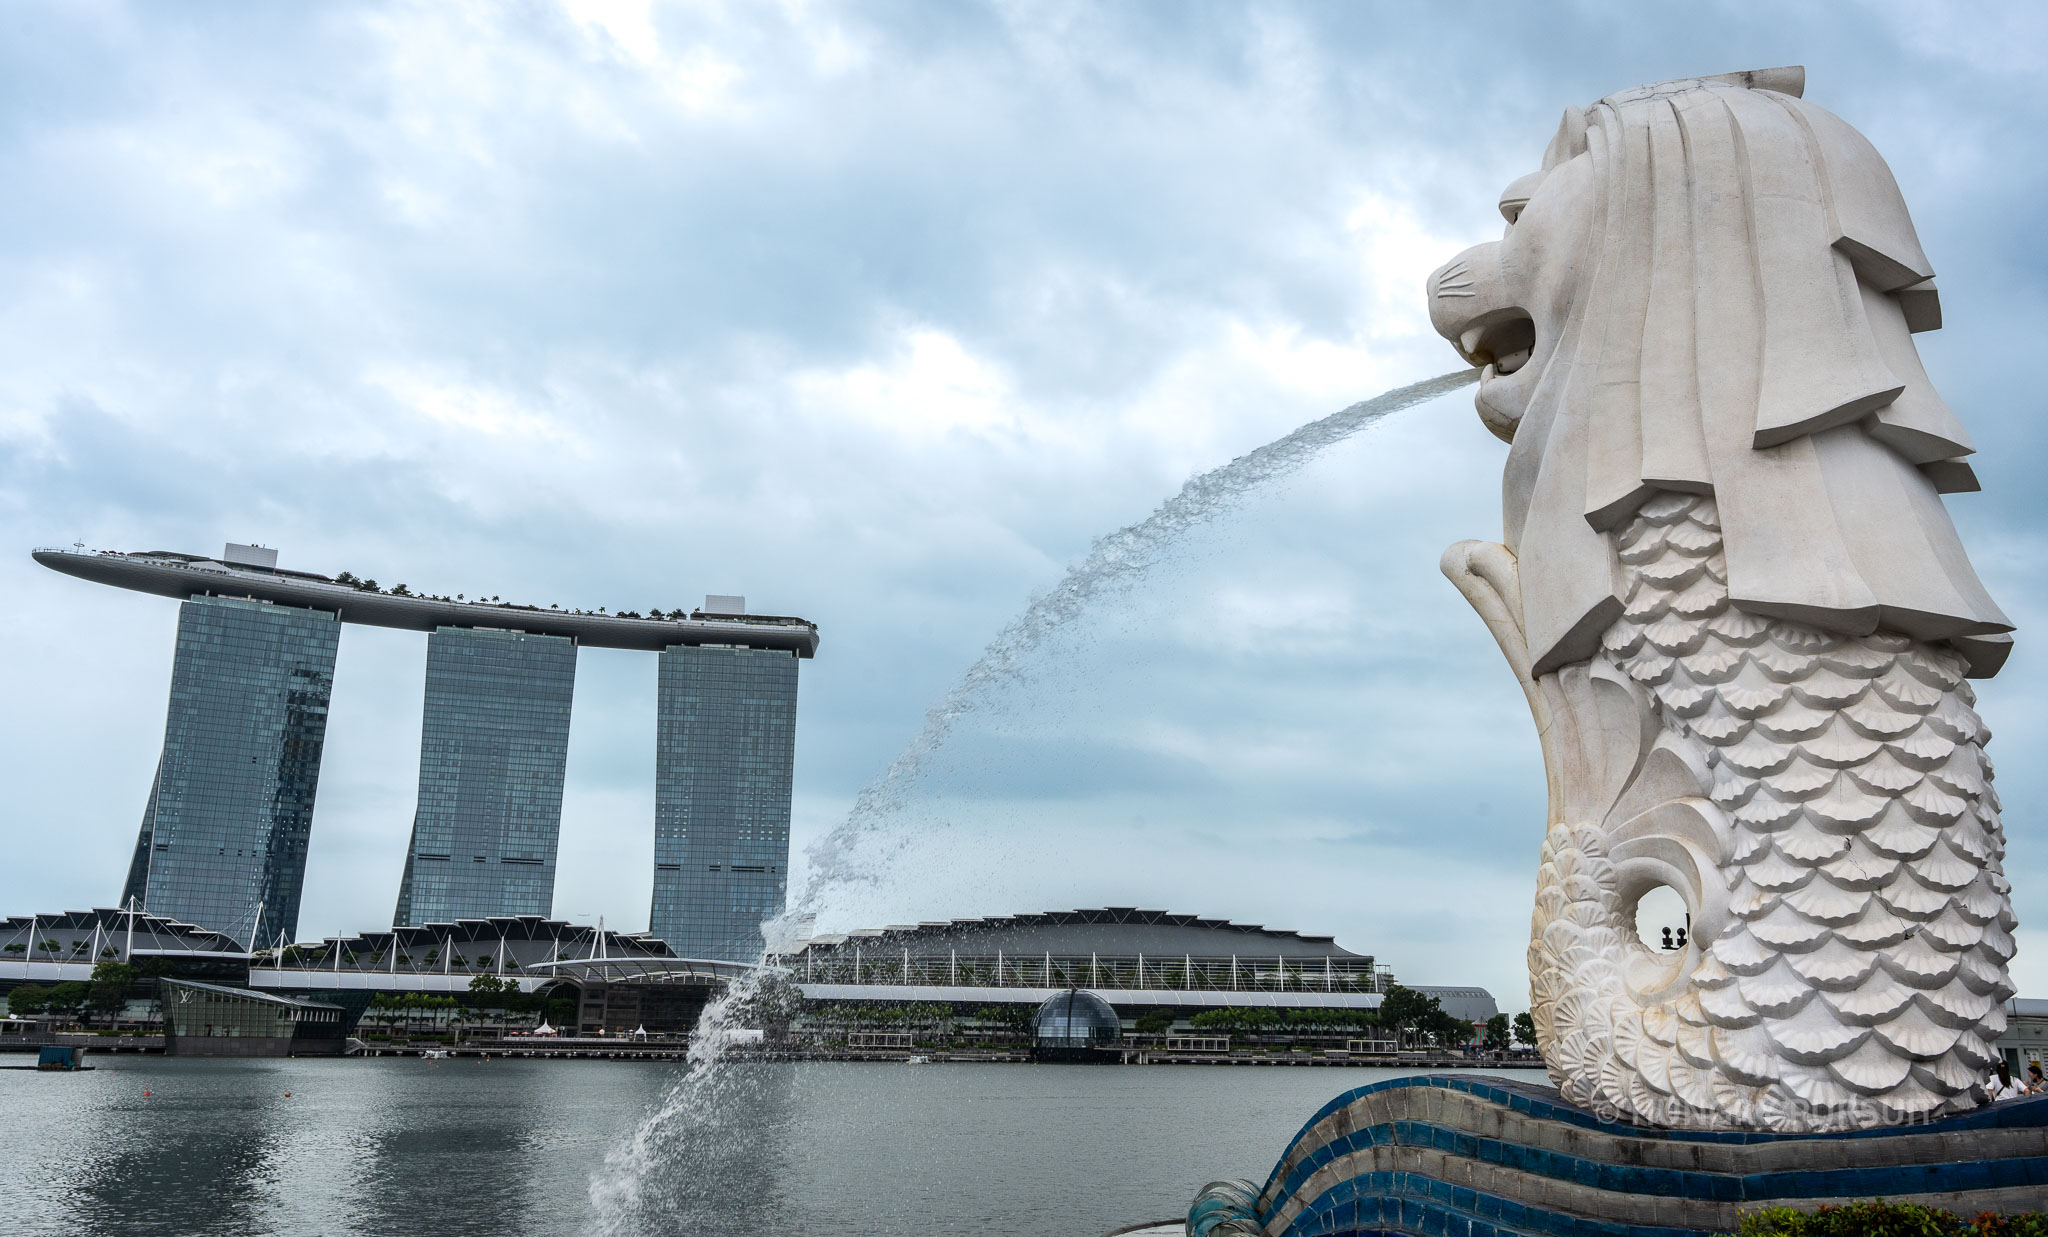 Picture of the Merlion statue with Marina Bay Sands in the background, a famous landmark in Singapore